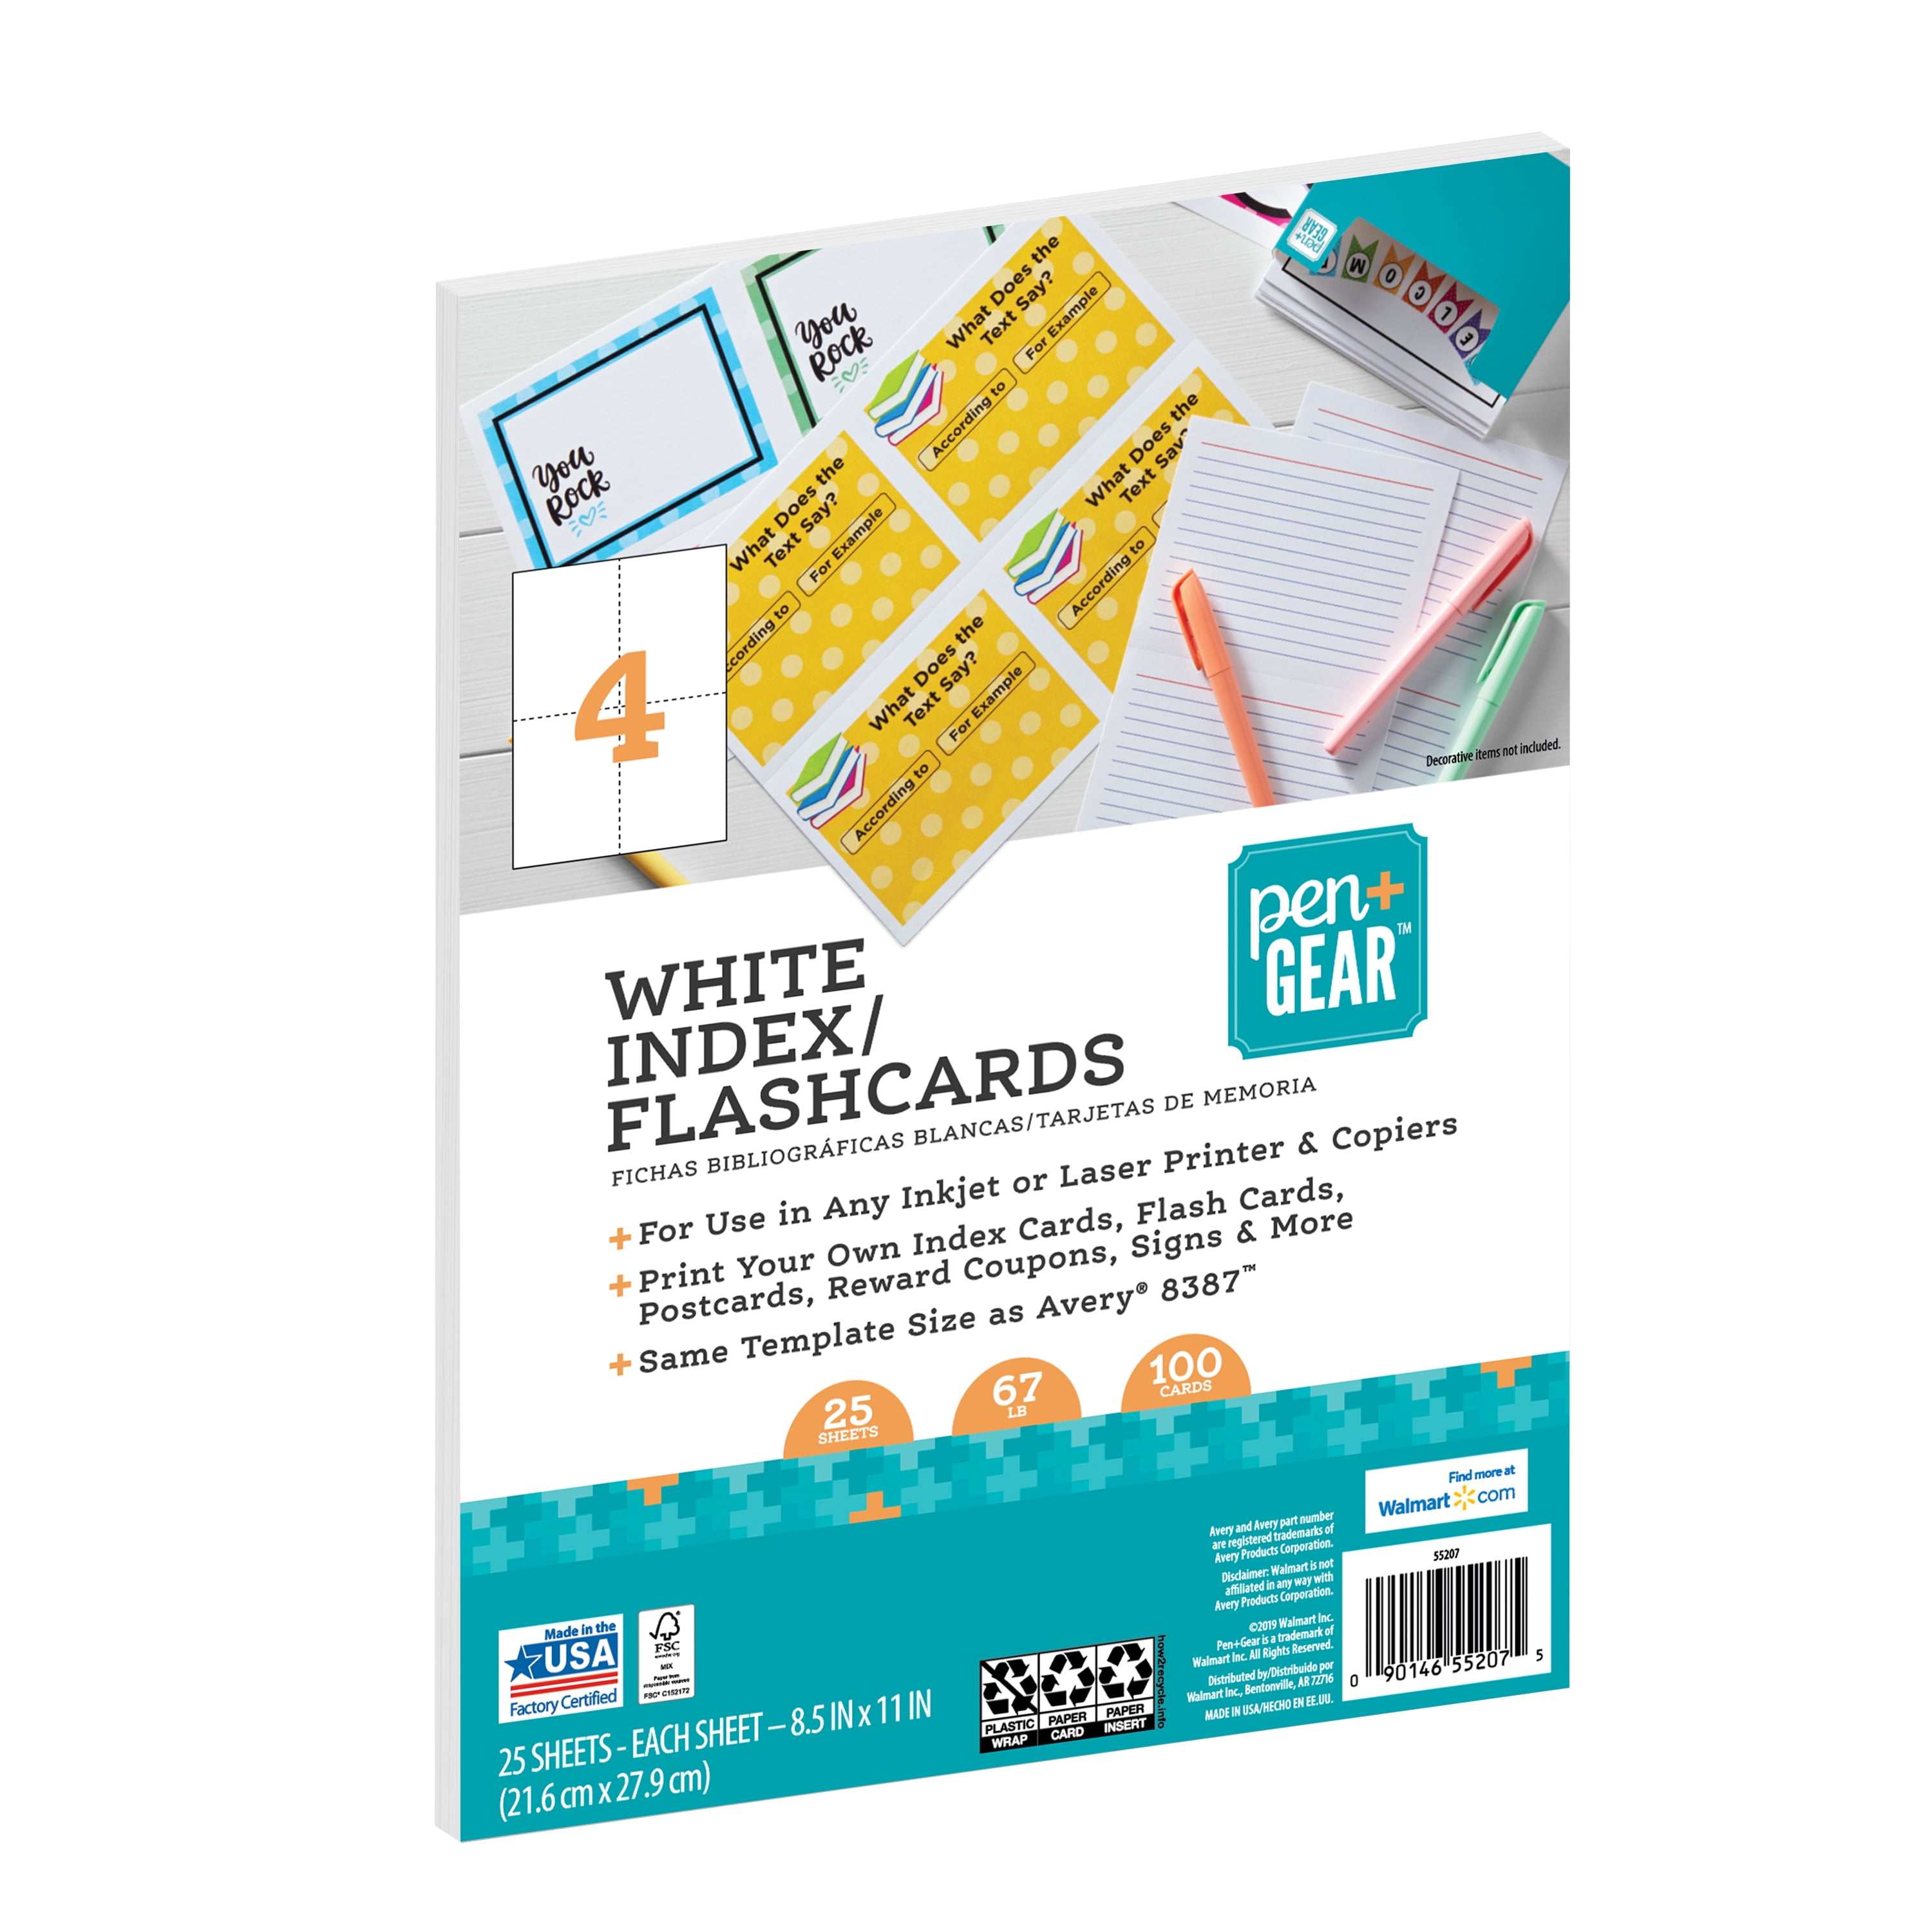 Pen + Gear White Index & Flash Cards, 4 per Page, 4.25 x 5.5 in, 67 lb.,  Unruled, 100 Cards 